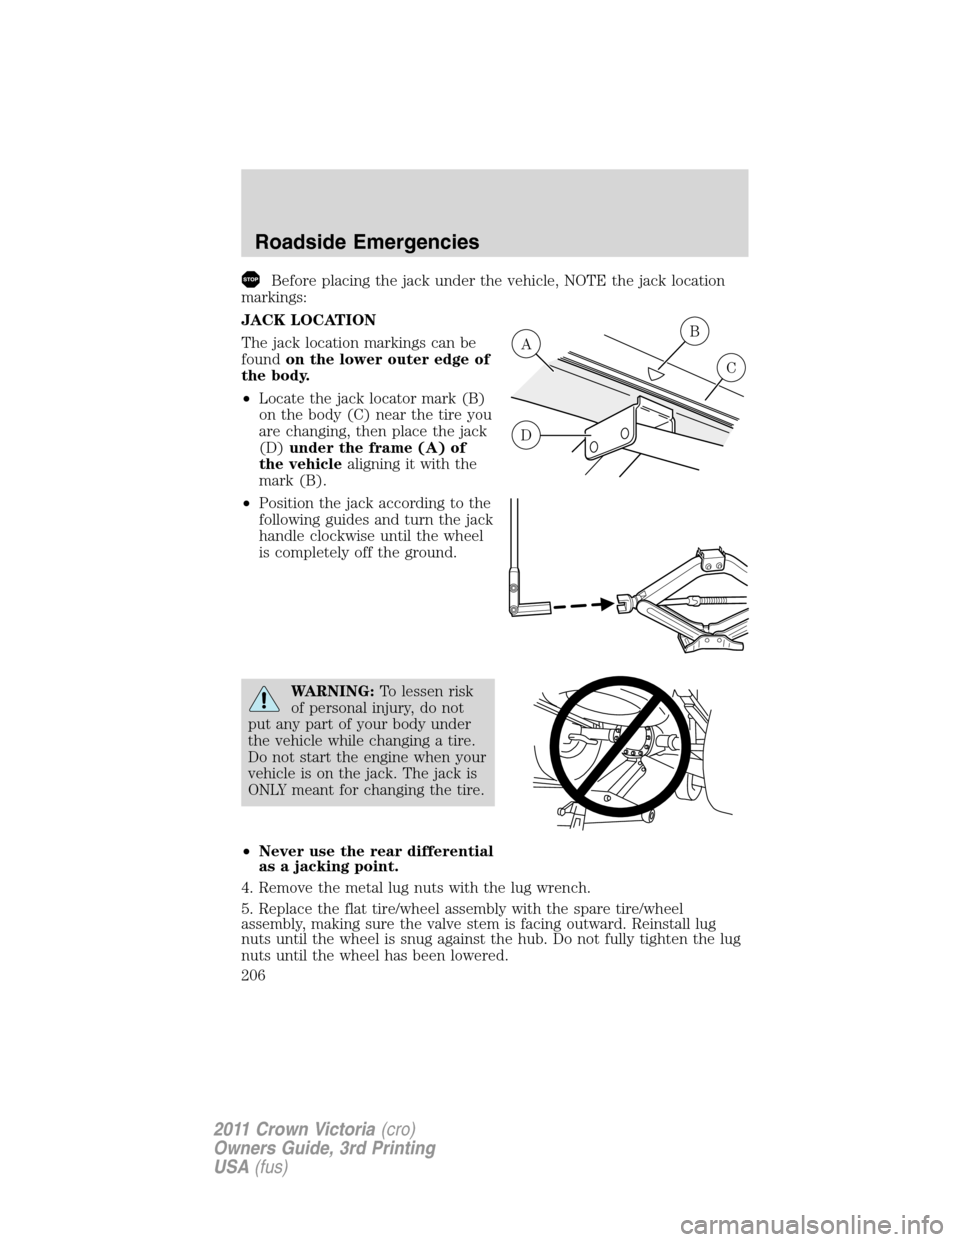 FORD CROWN VICTORIA 2011 2.G Owners Manual Before placing the jack under the vehicle, NOTE the jack location
markings:
JACK LOCATION
The jack location markings can be
foundon the lower outer edge of
the body.
•Locate the jack locator mark (B